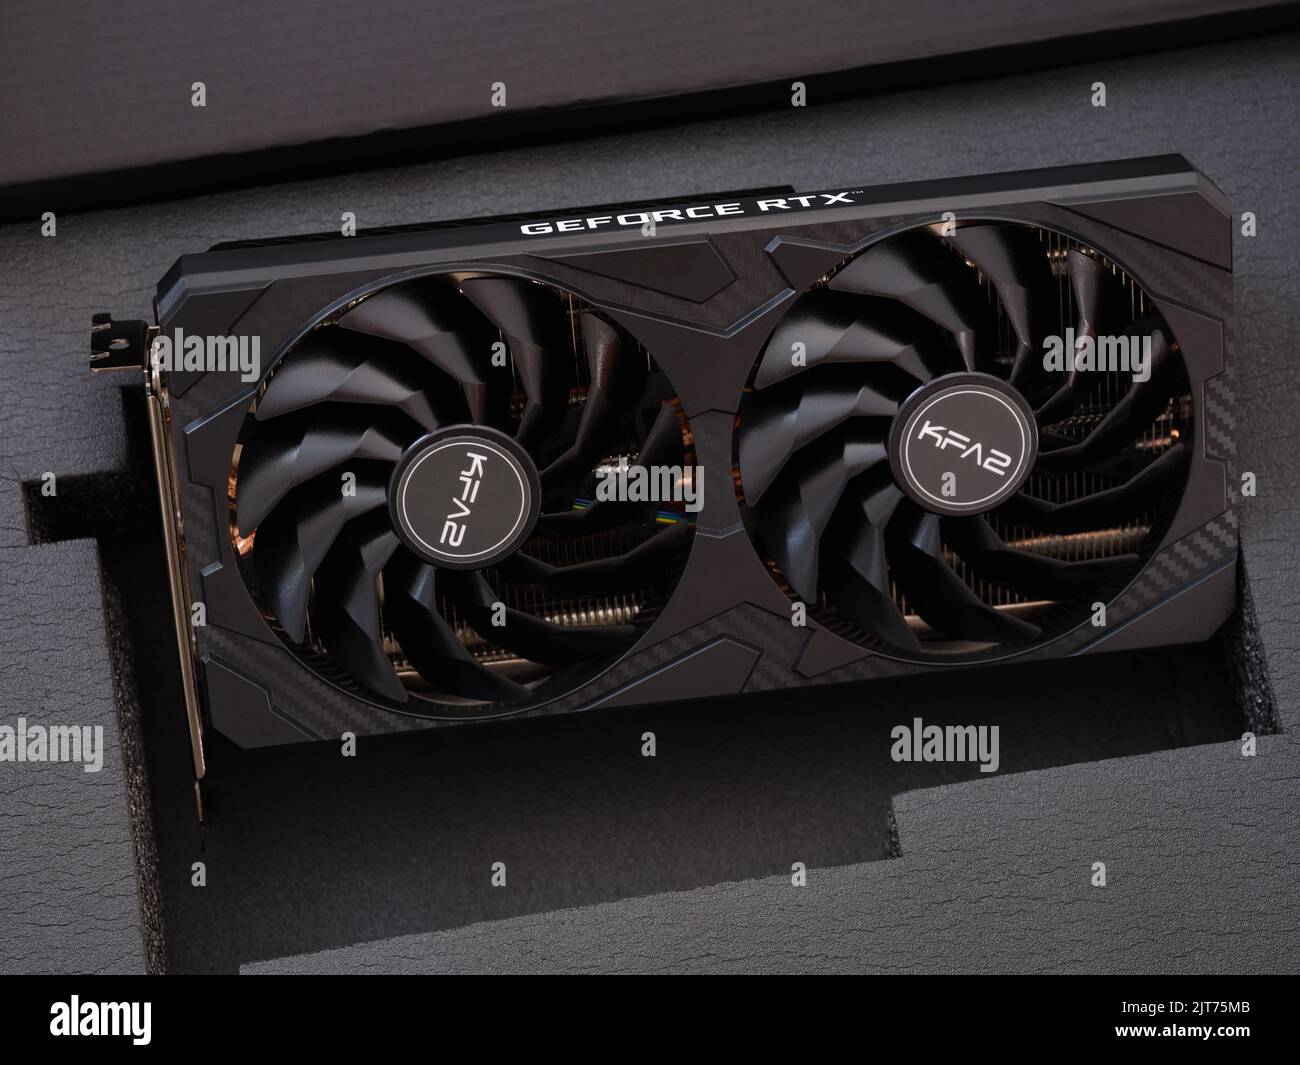 GeForce PC Video Card  Fashion, Commercial, Fine Art Stock Photo Archive